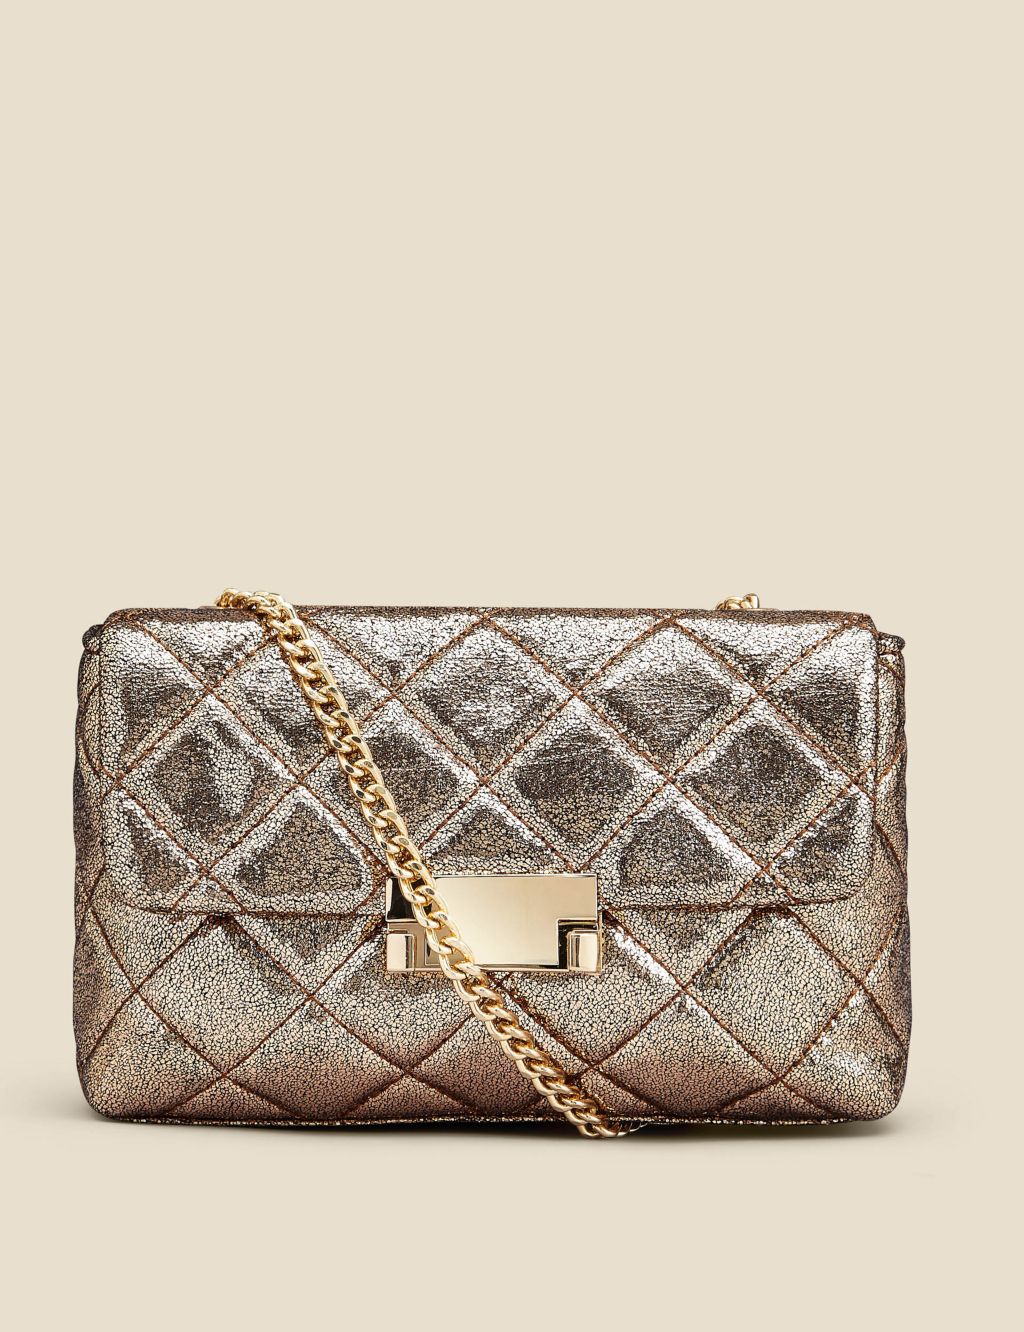 Quilted Metallic Chain Strap Cross Body Bag image 2